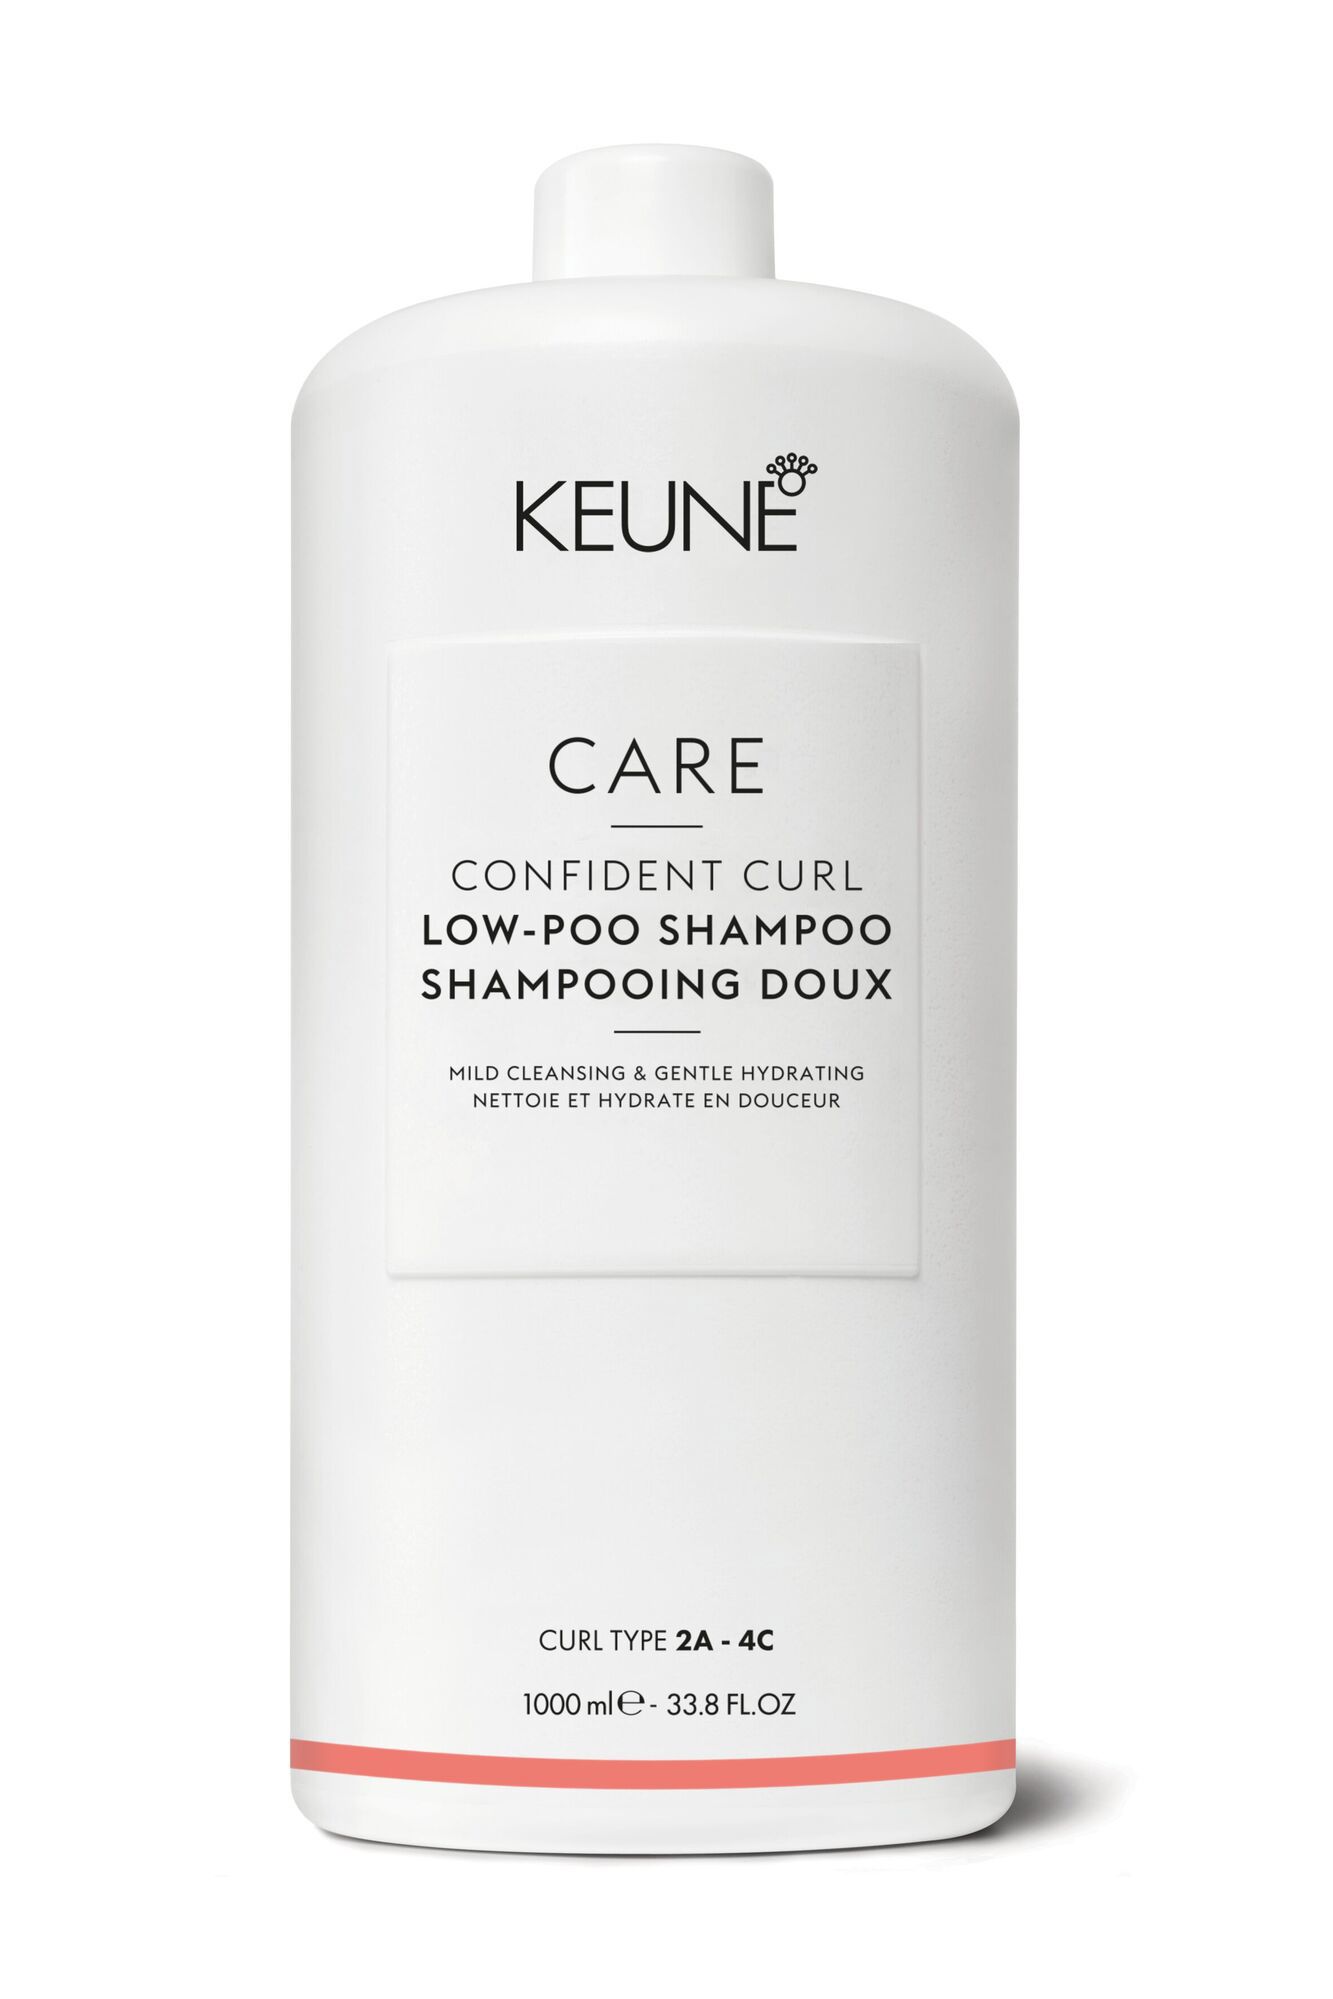 To make your curls more elastic, use Confident Curl Low-Poo Shampoo. It moisturizes and shapes your curls. Find it on keune.ch.